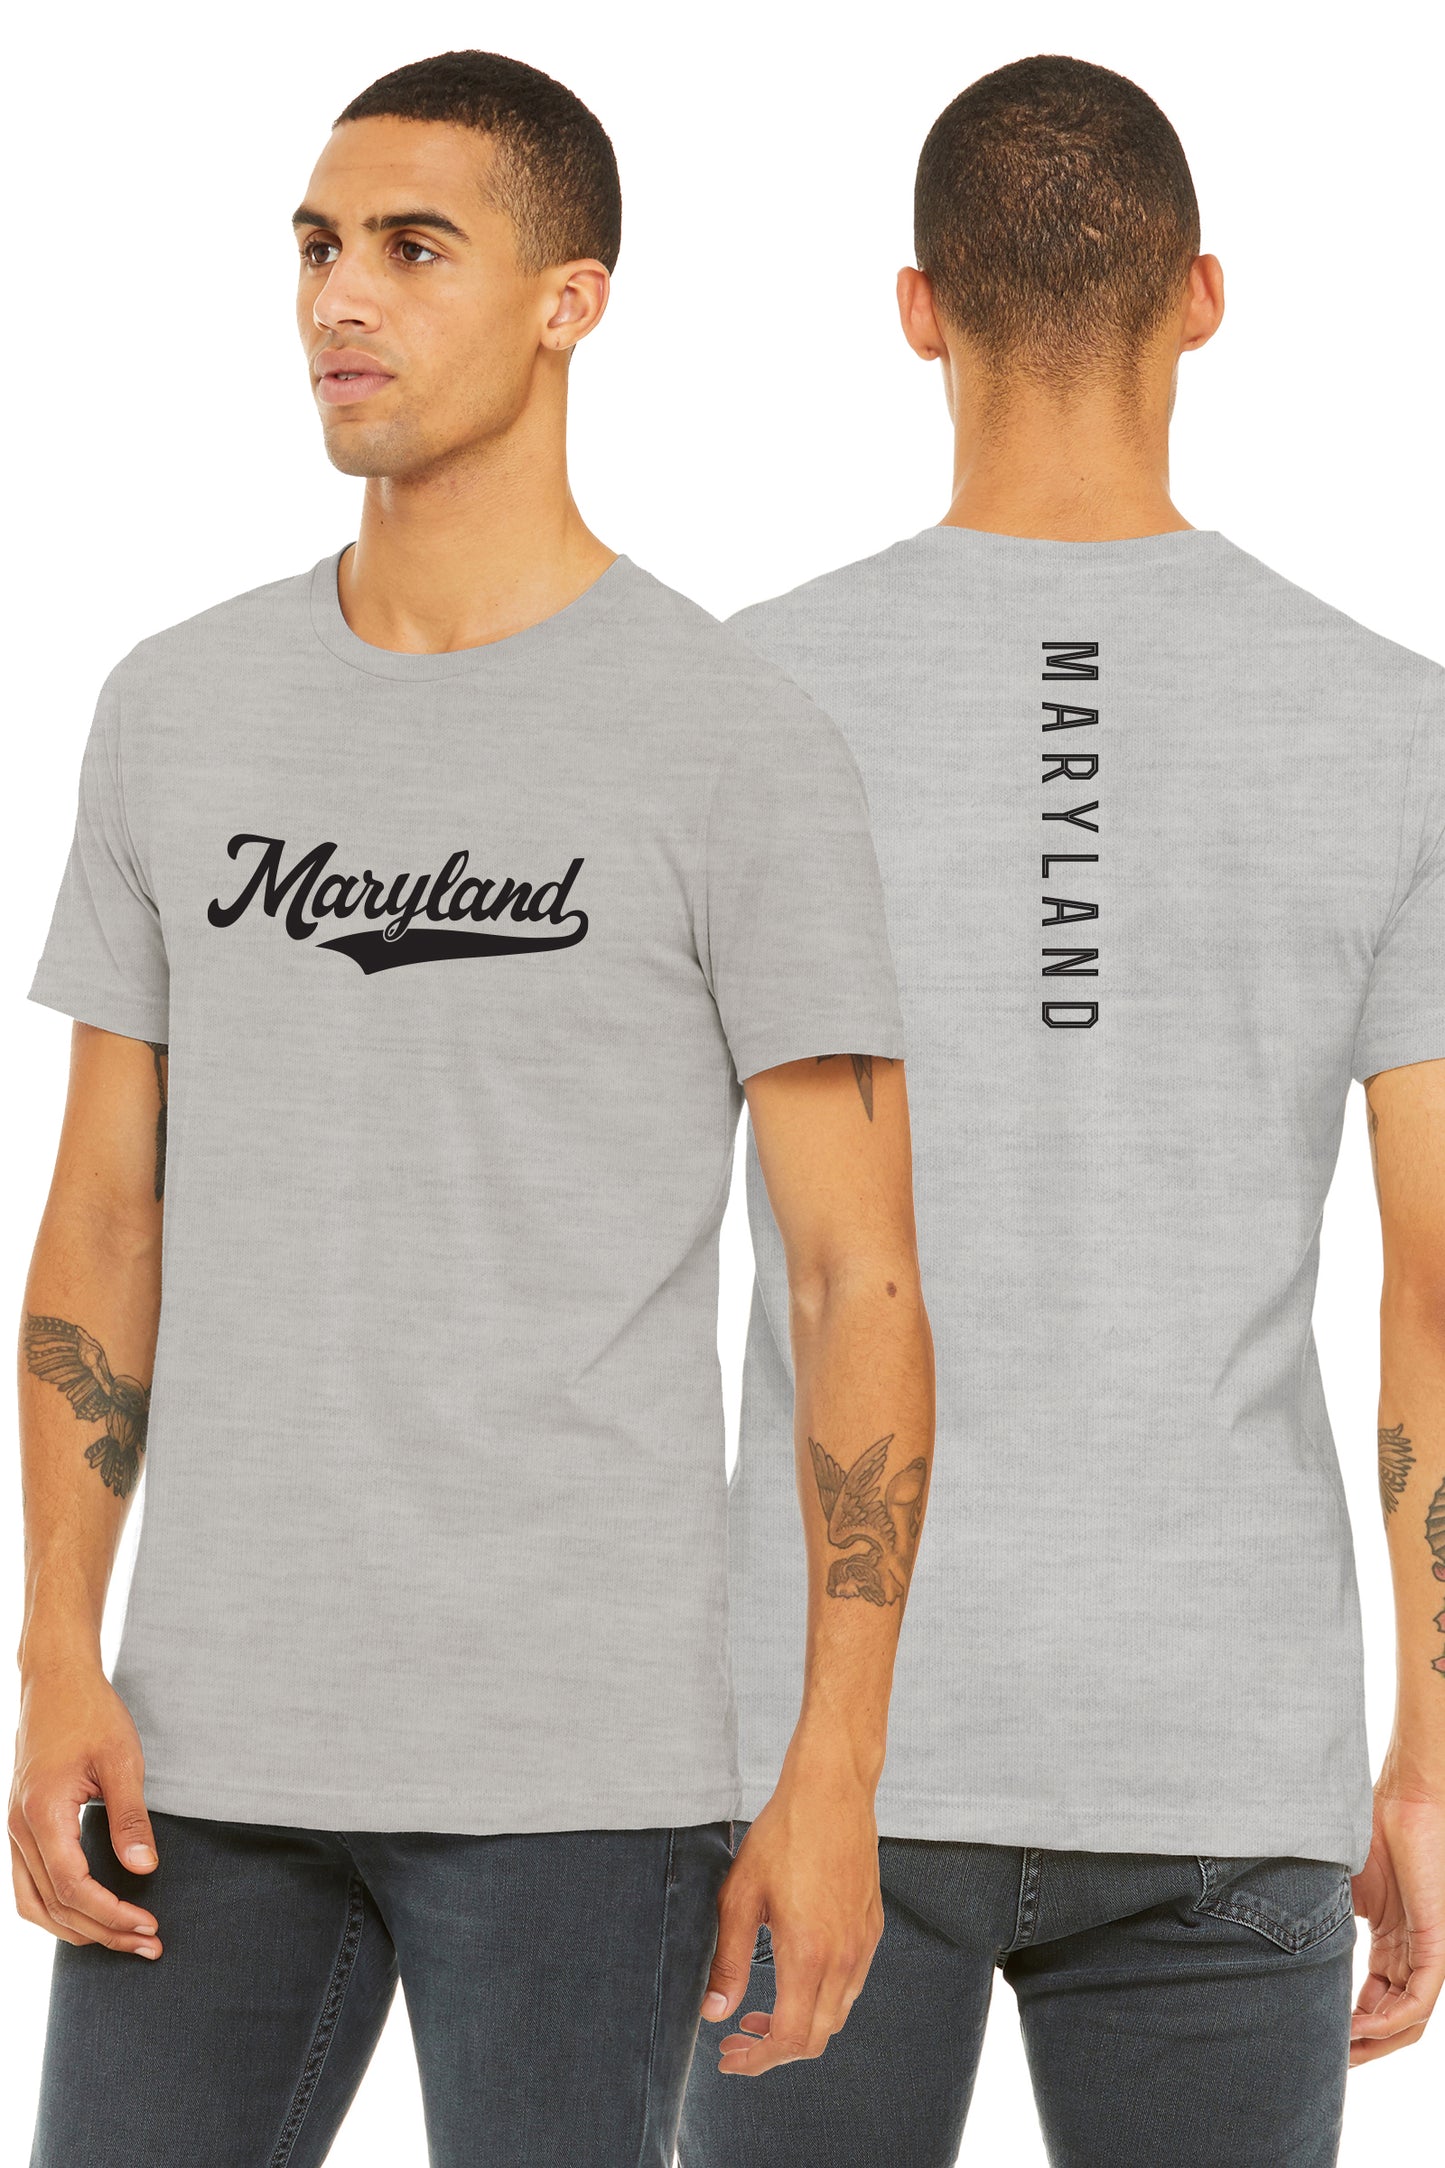 Daxton Adult Unisex Tshirt Maryland Script with Vertical on the Back